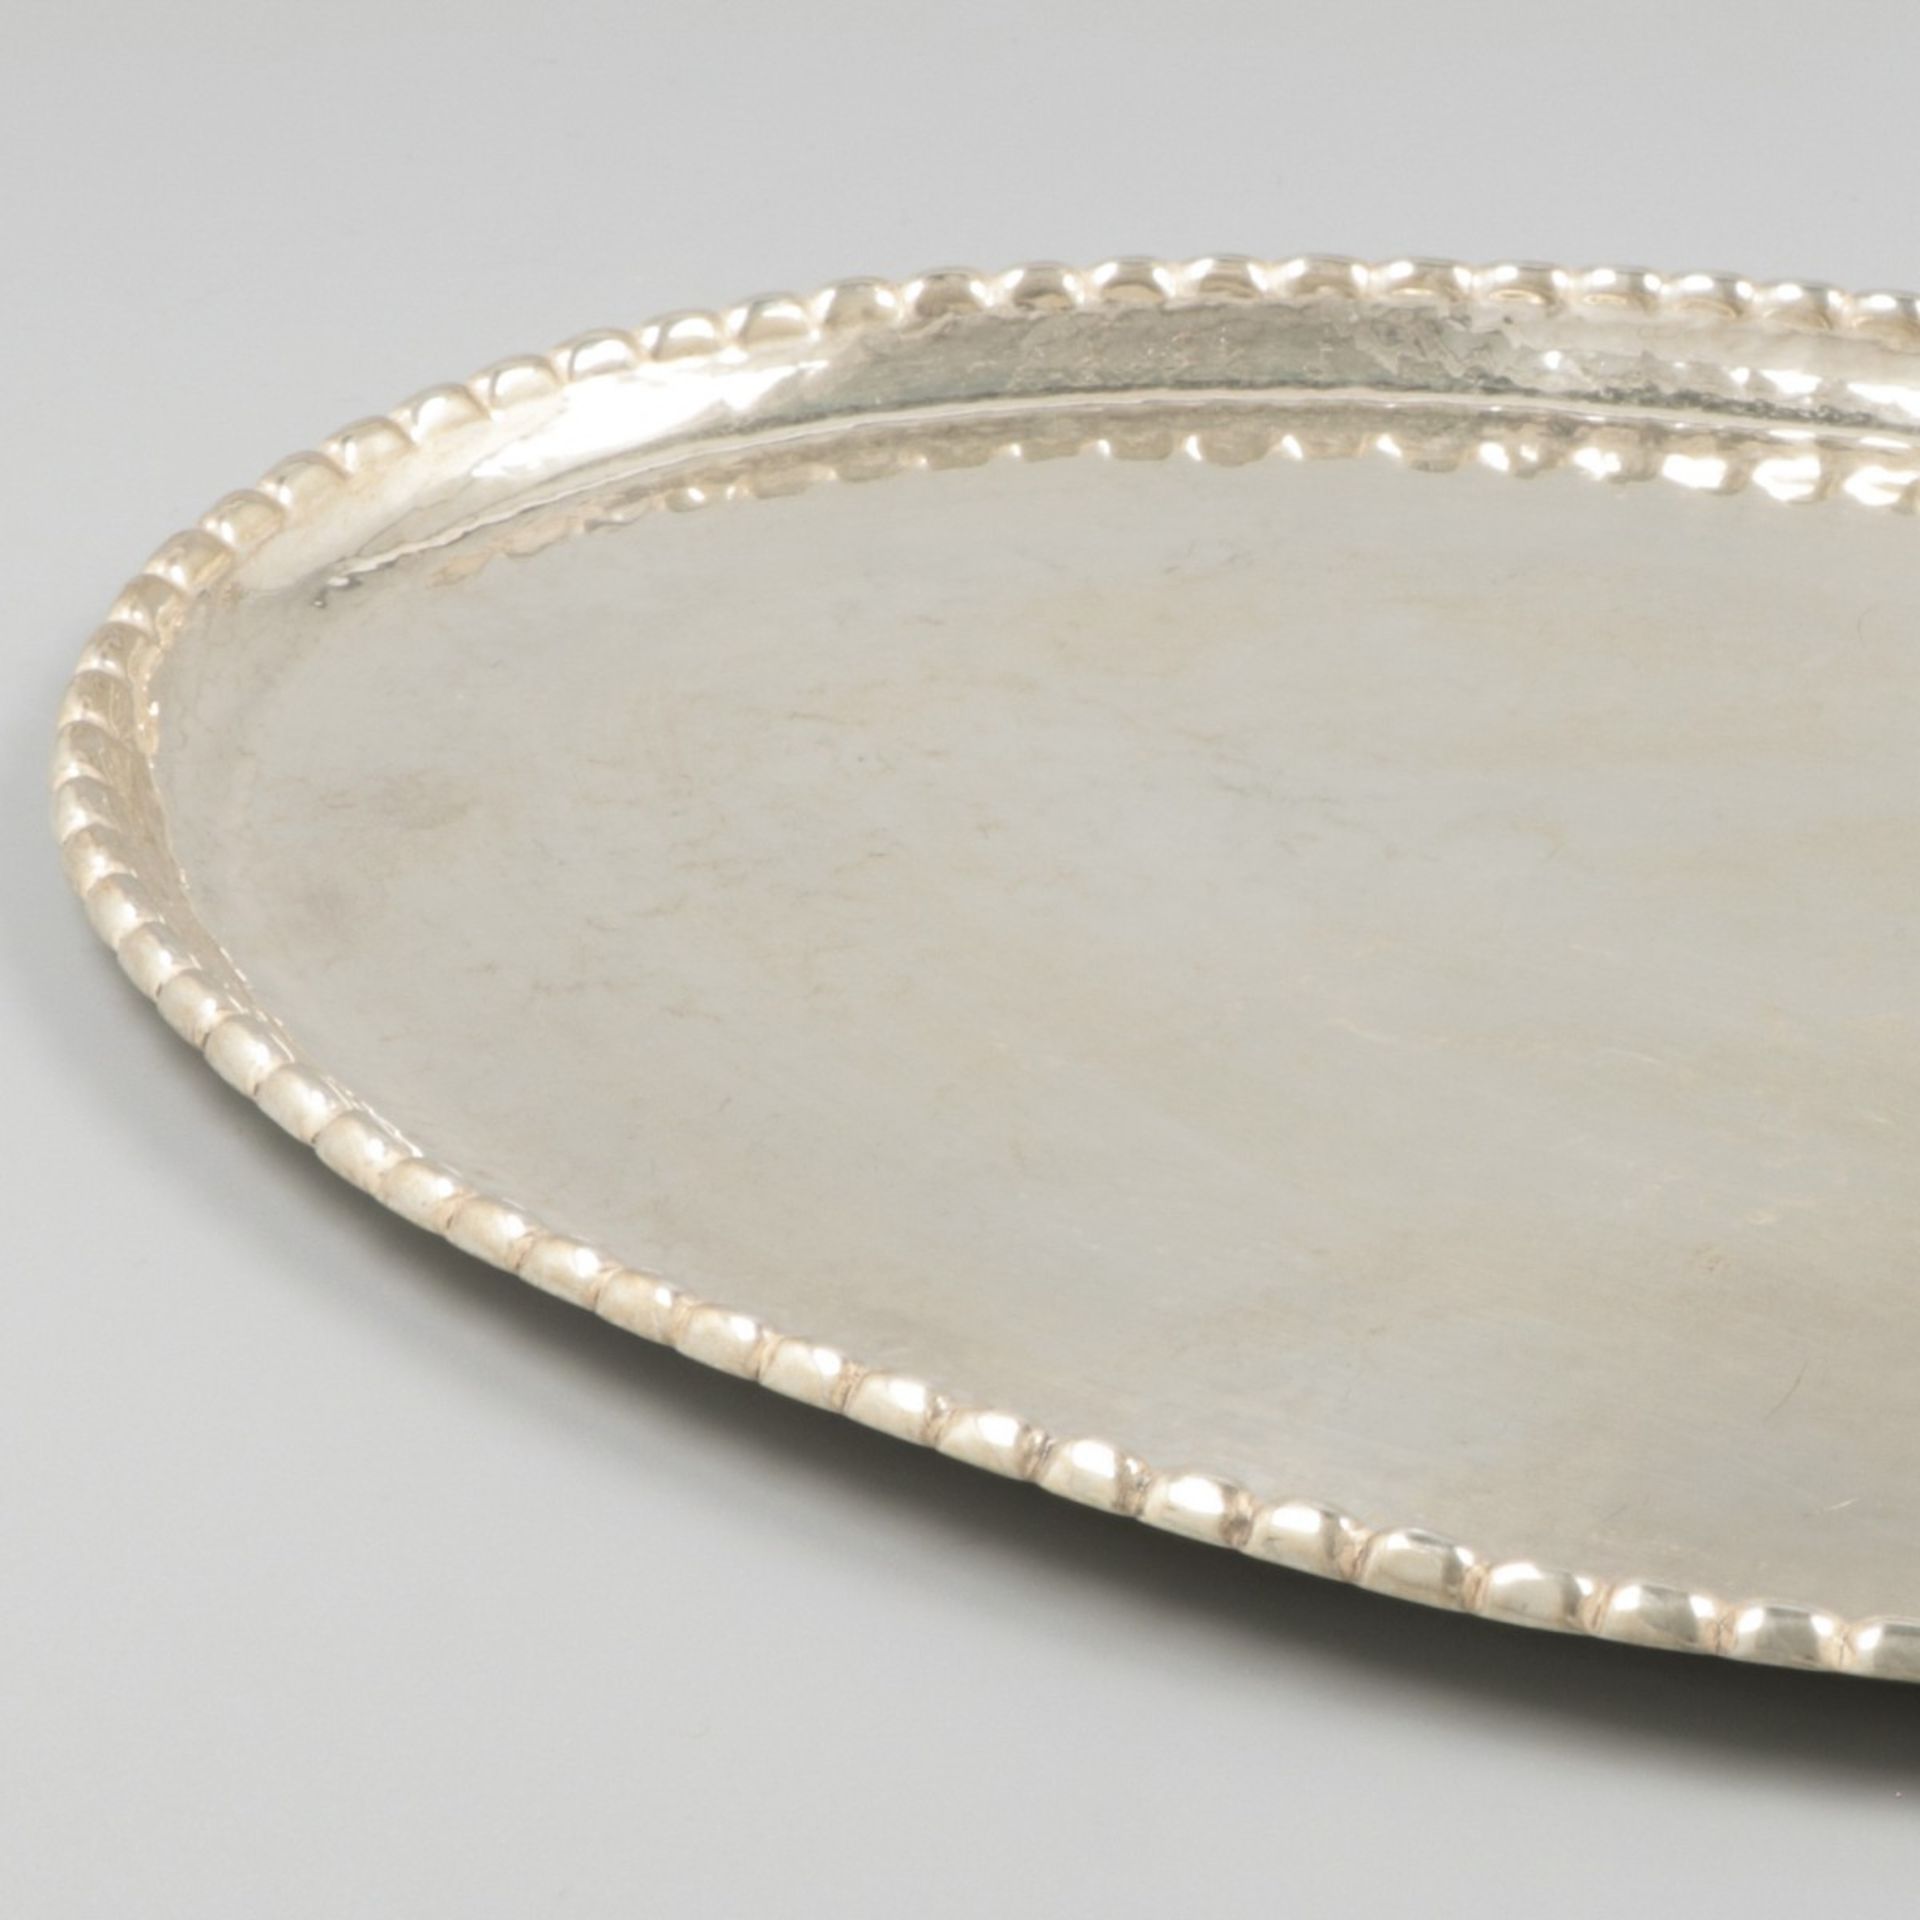 Serving tray silver. - Image 2 of 5